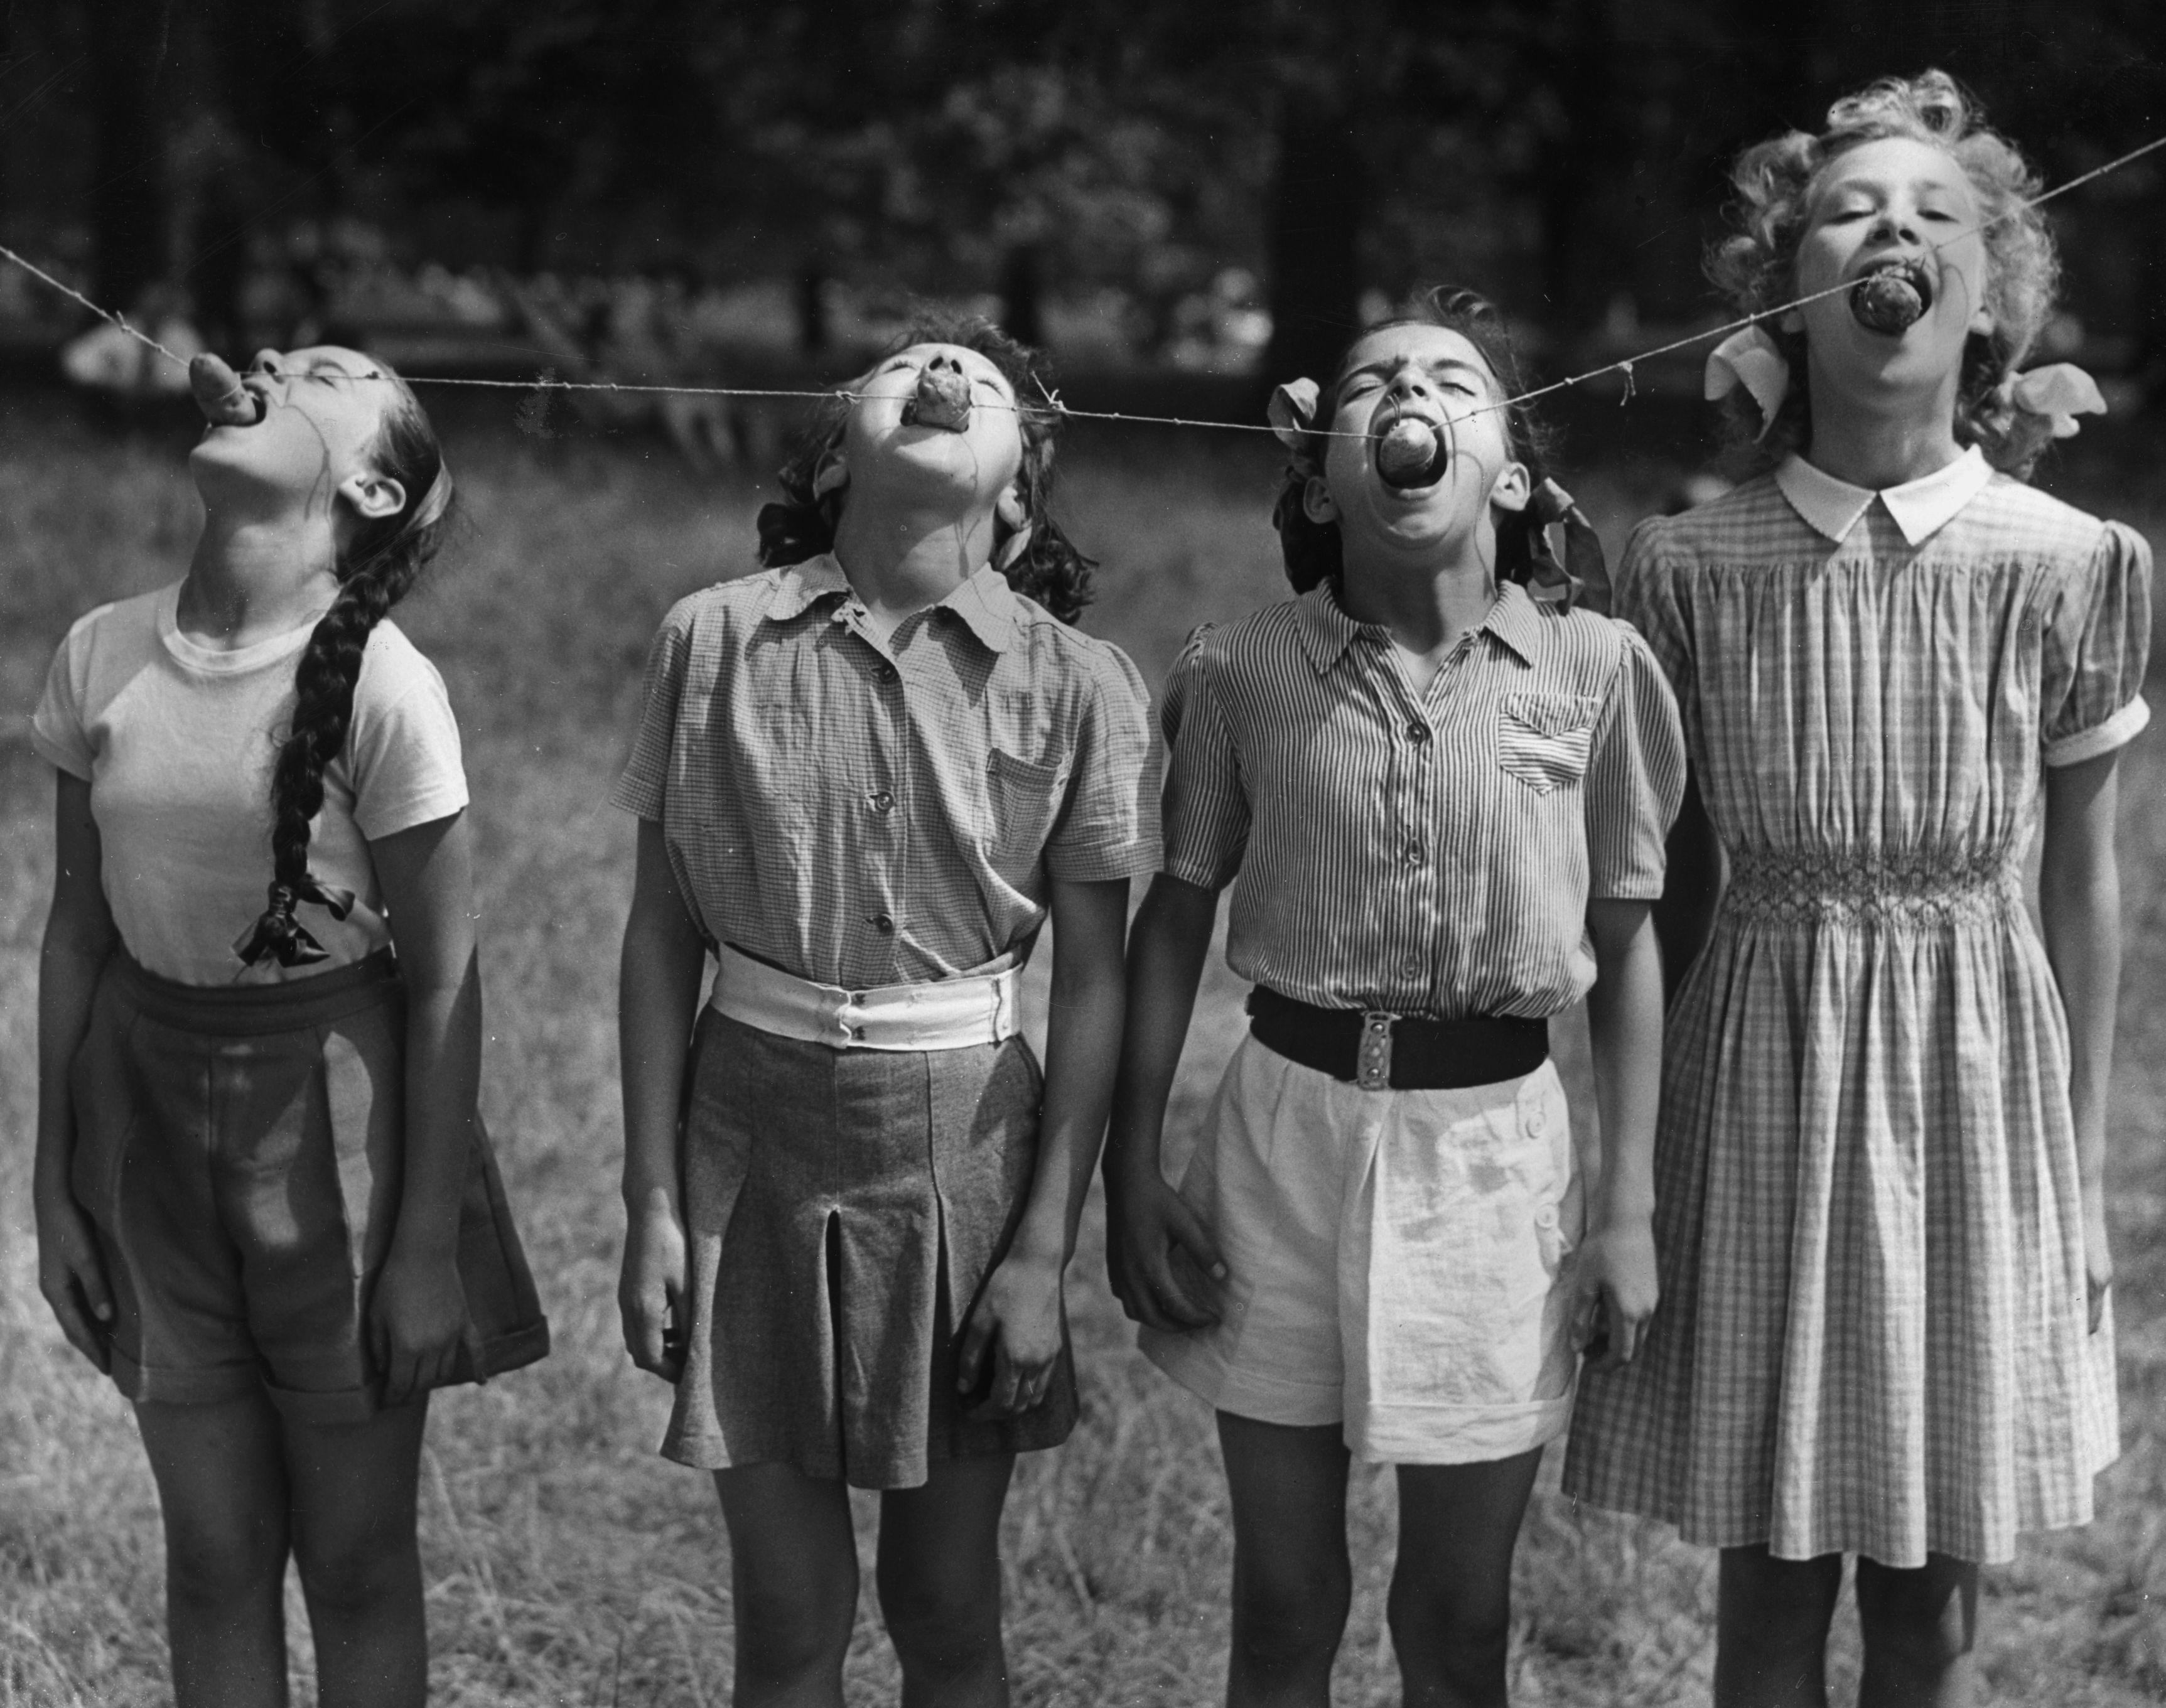 25th July 1952: Four young dancers of the Italia Conti School compete in a potato eating contest in Green Park, London. They are (L to R) Frances Reynolds of Palmers Green, Sonia Hoey of Hampton Court, Maureen Bullion of Catford and Elizabeth Hewitt of Erith in Kent. (Photo by Reg Speller/Keystone/Getty Images)